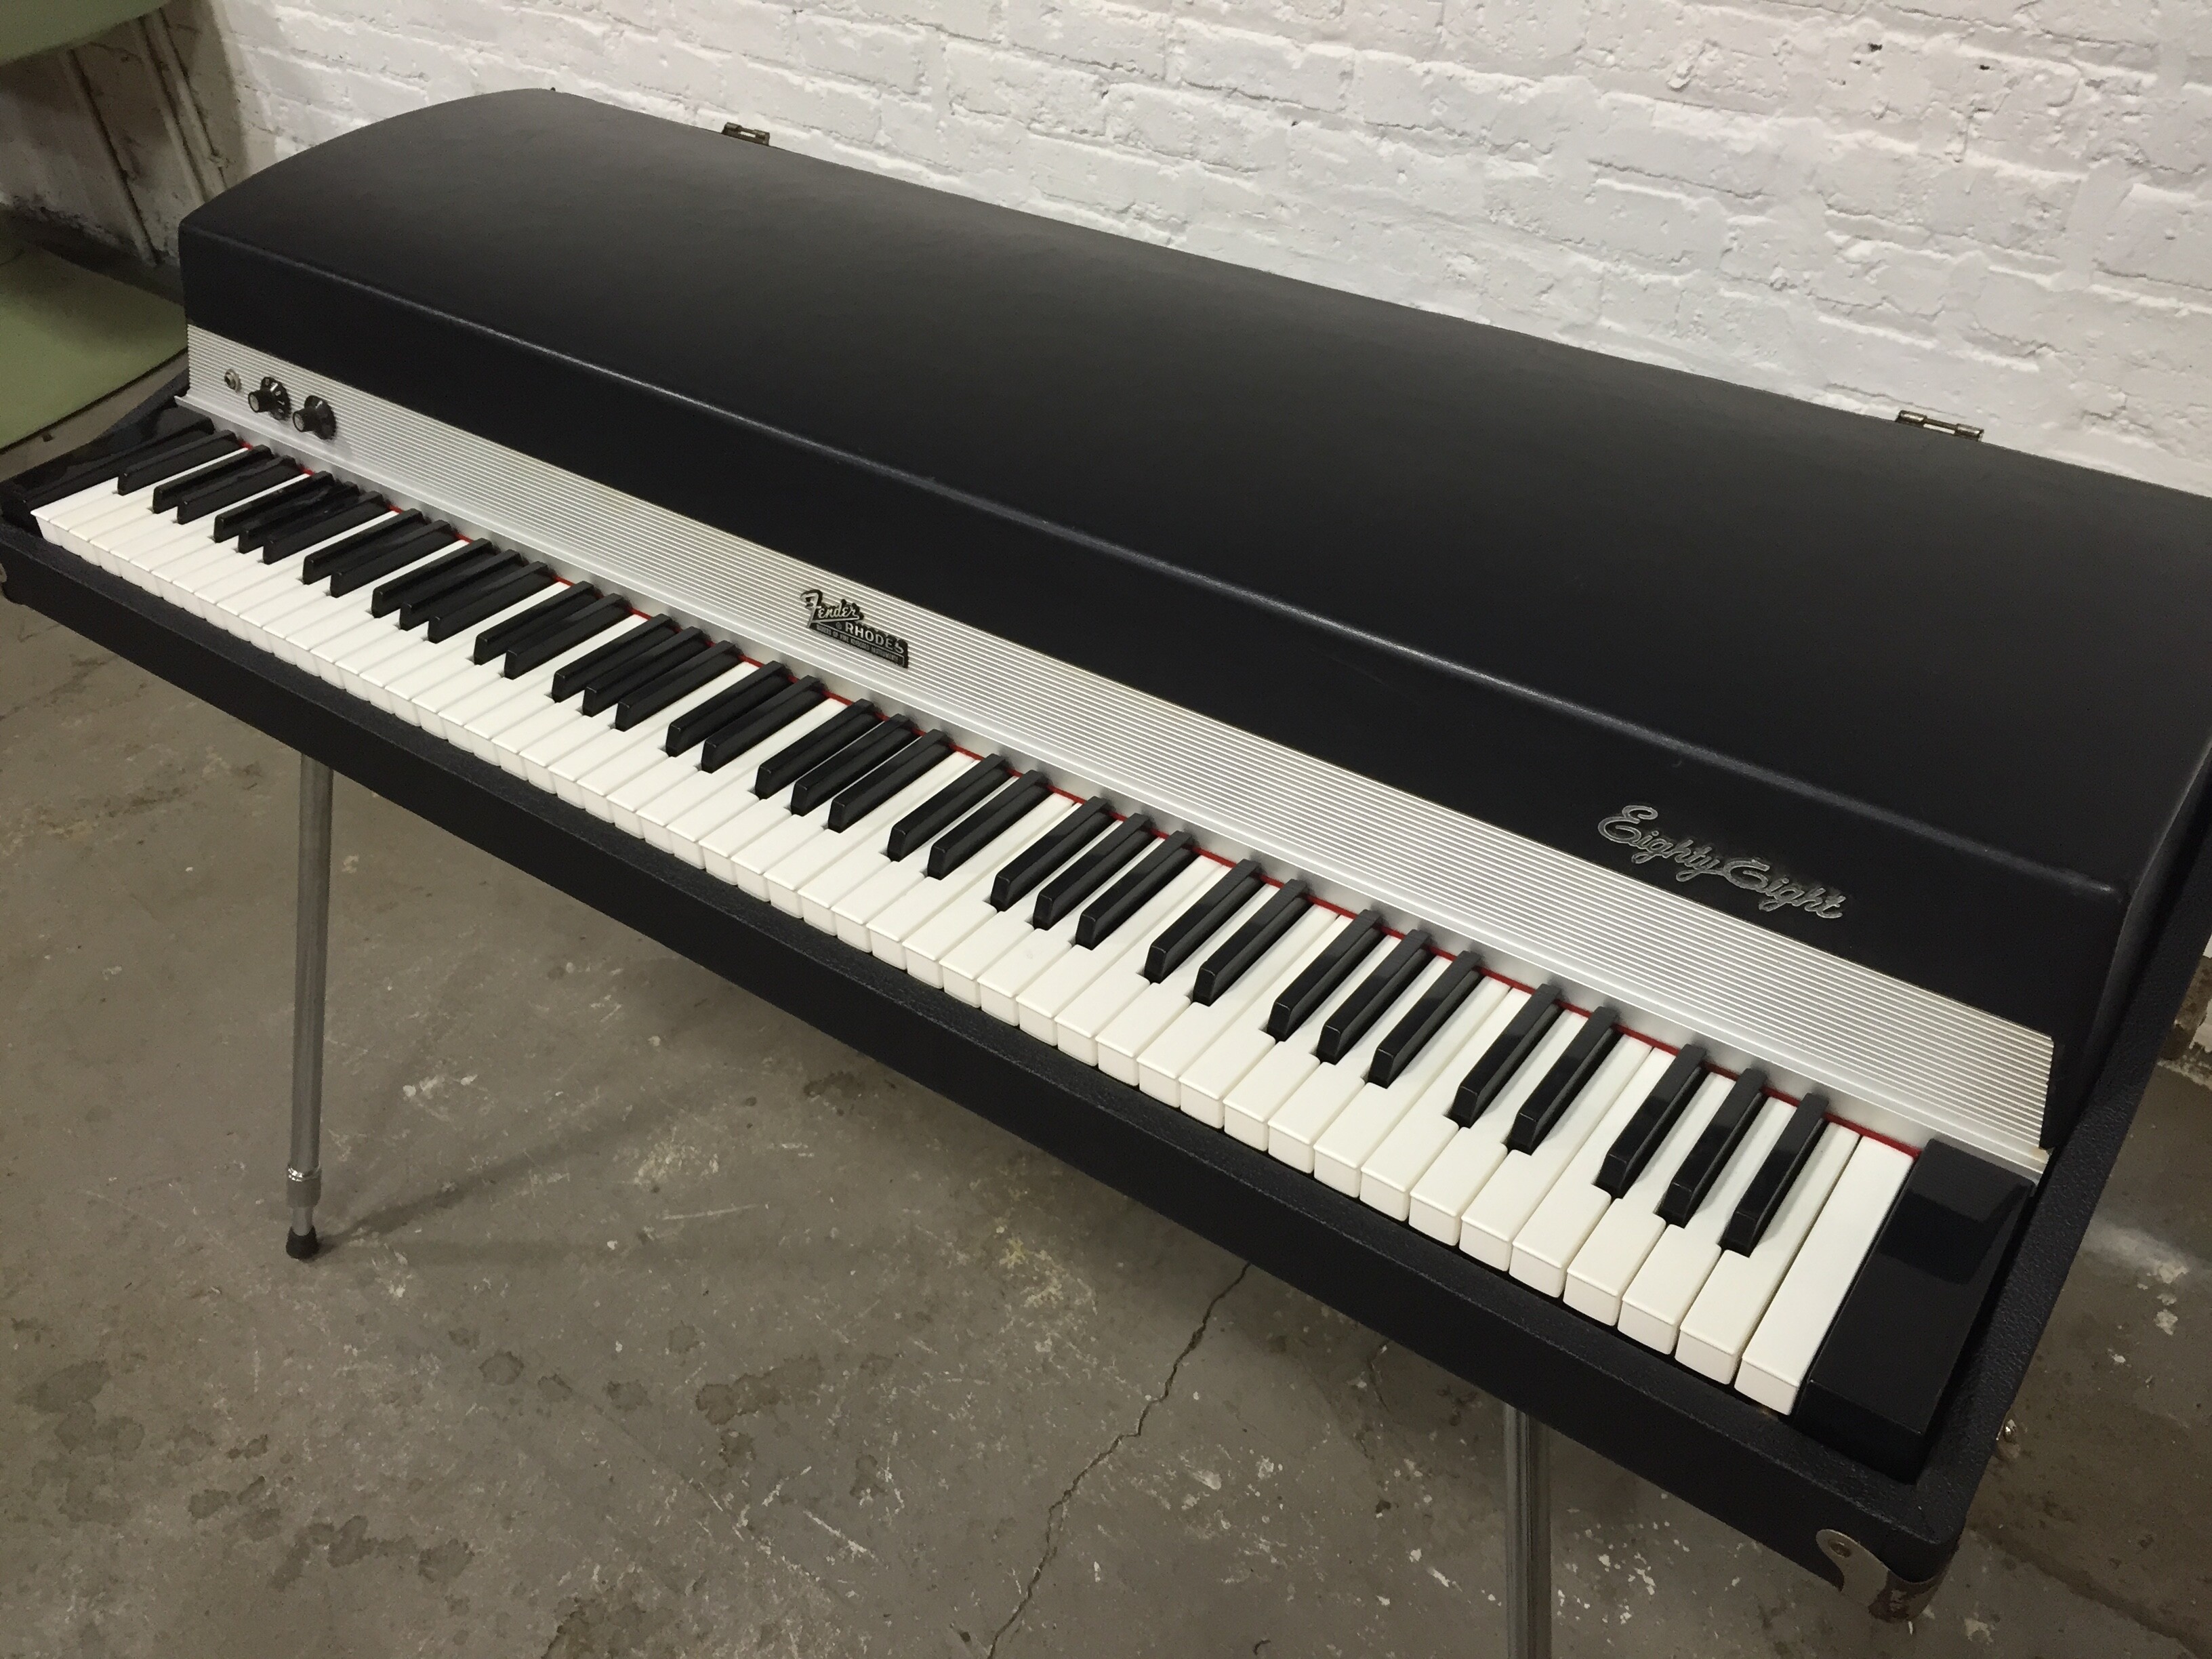 For Sale: 1973 Fender Rhodes Stage 88 - The Chicago Electric Piano Co.3264 x 2448